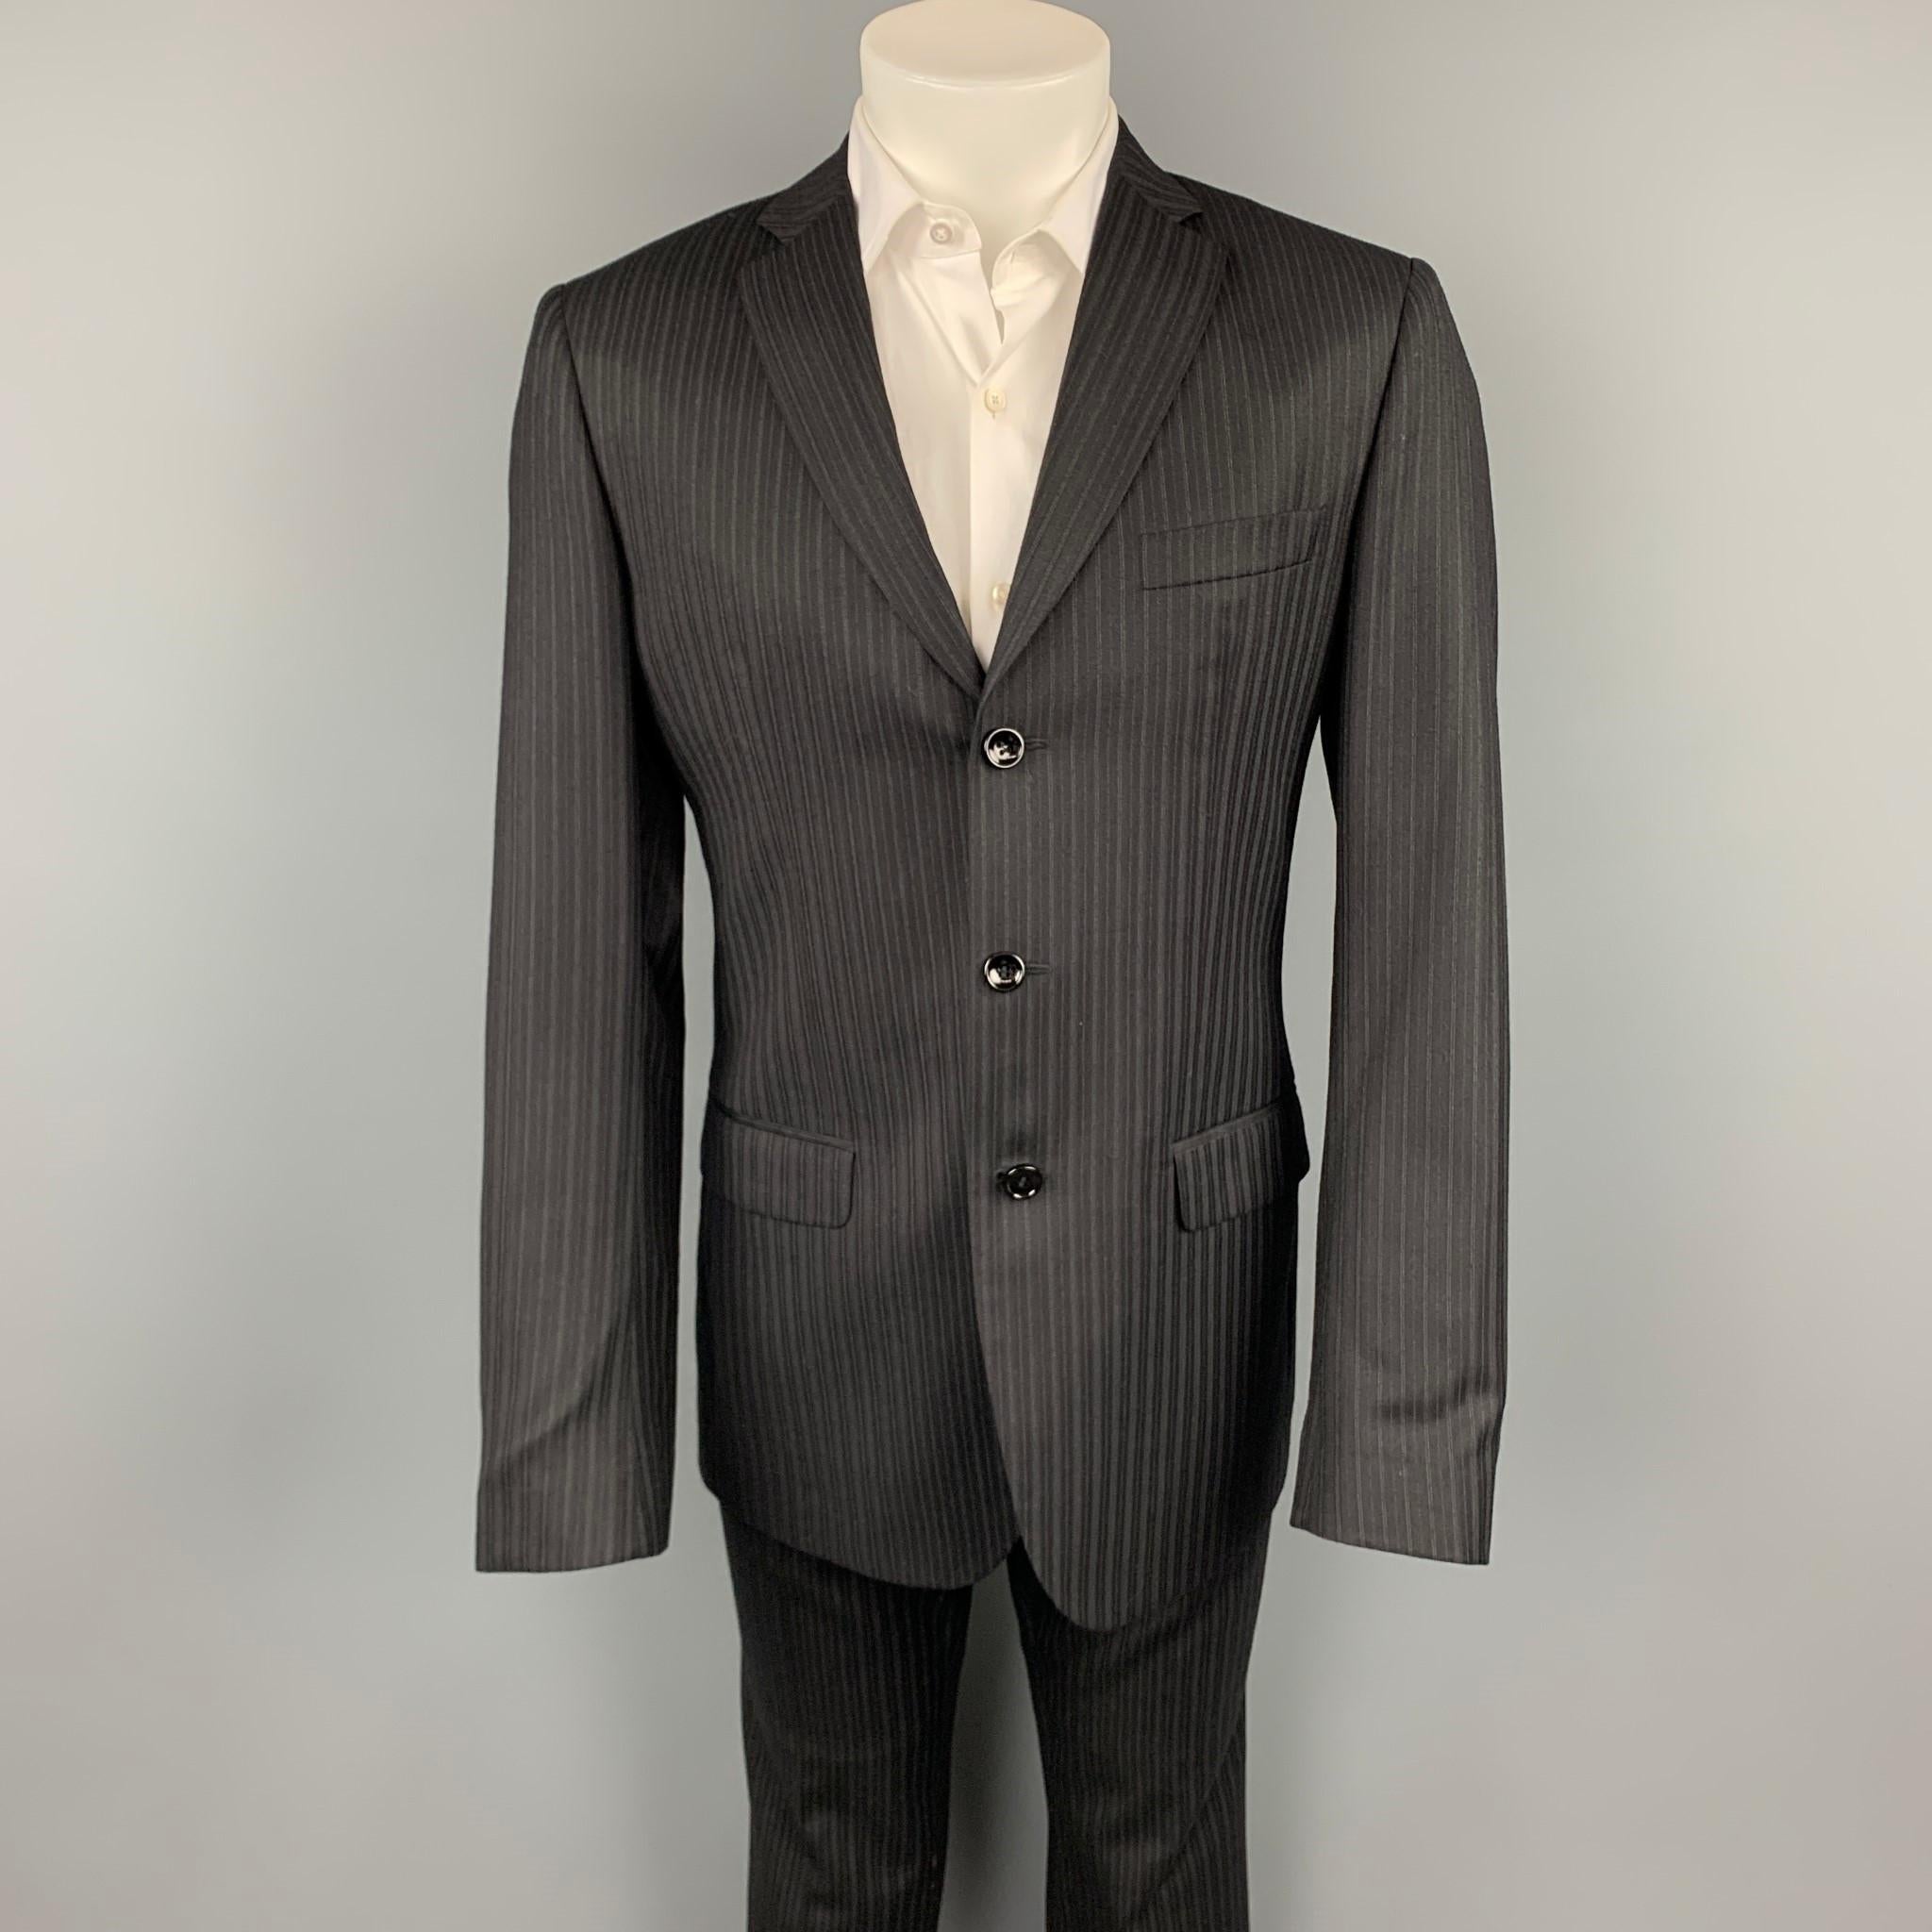 D&G by DOLCE & GABBANA suit comes in a black stripe wool blend with a full liner and includes a single breasted, three button sport coat with a notch lapel and matching flat front trousers. Made in Italy.

Very Good Pre-Owned Condition.
Marked: IT